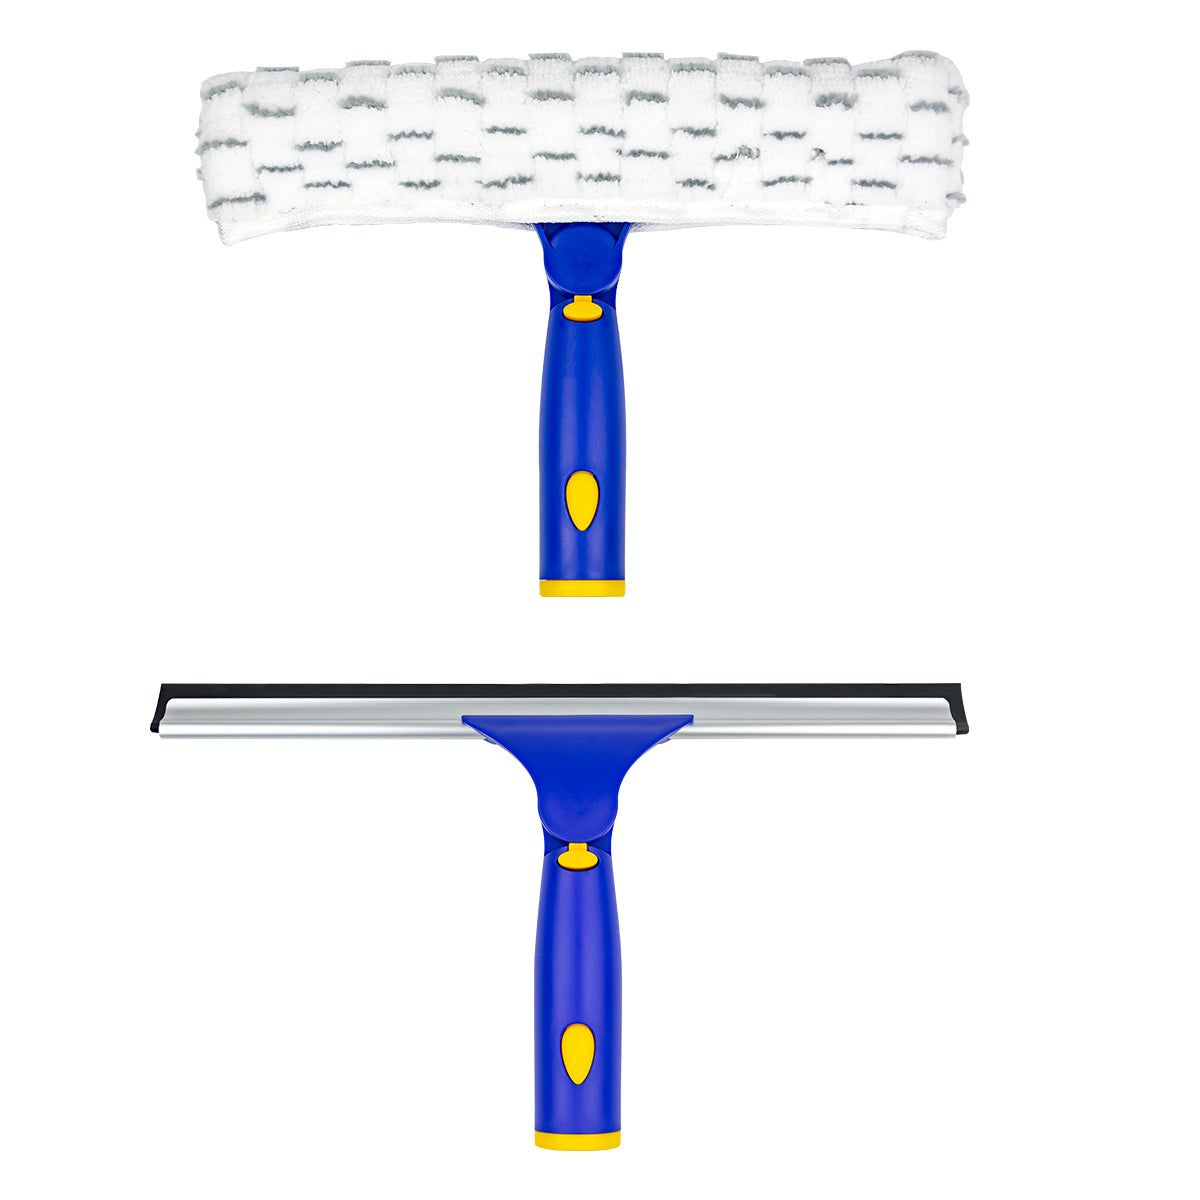 Squeegee and Microfiber Scrubber Combo, Extension Pole Sold Separately –  ITTAHO